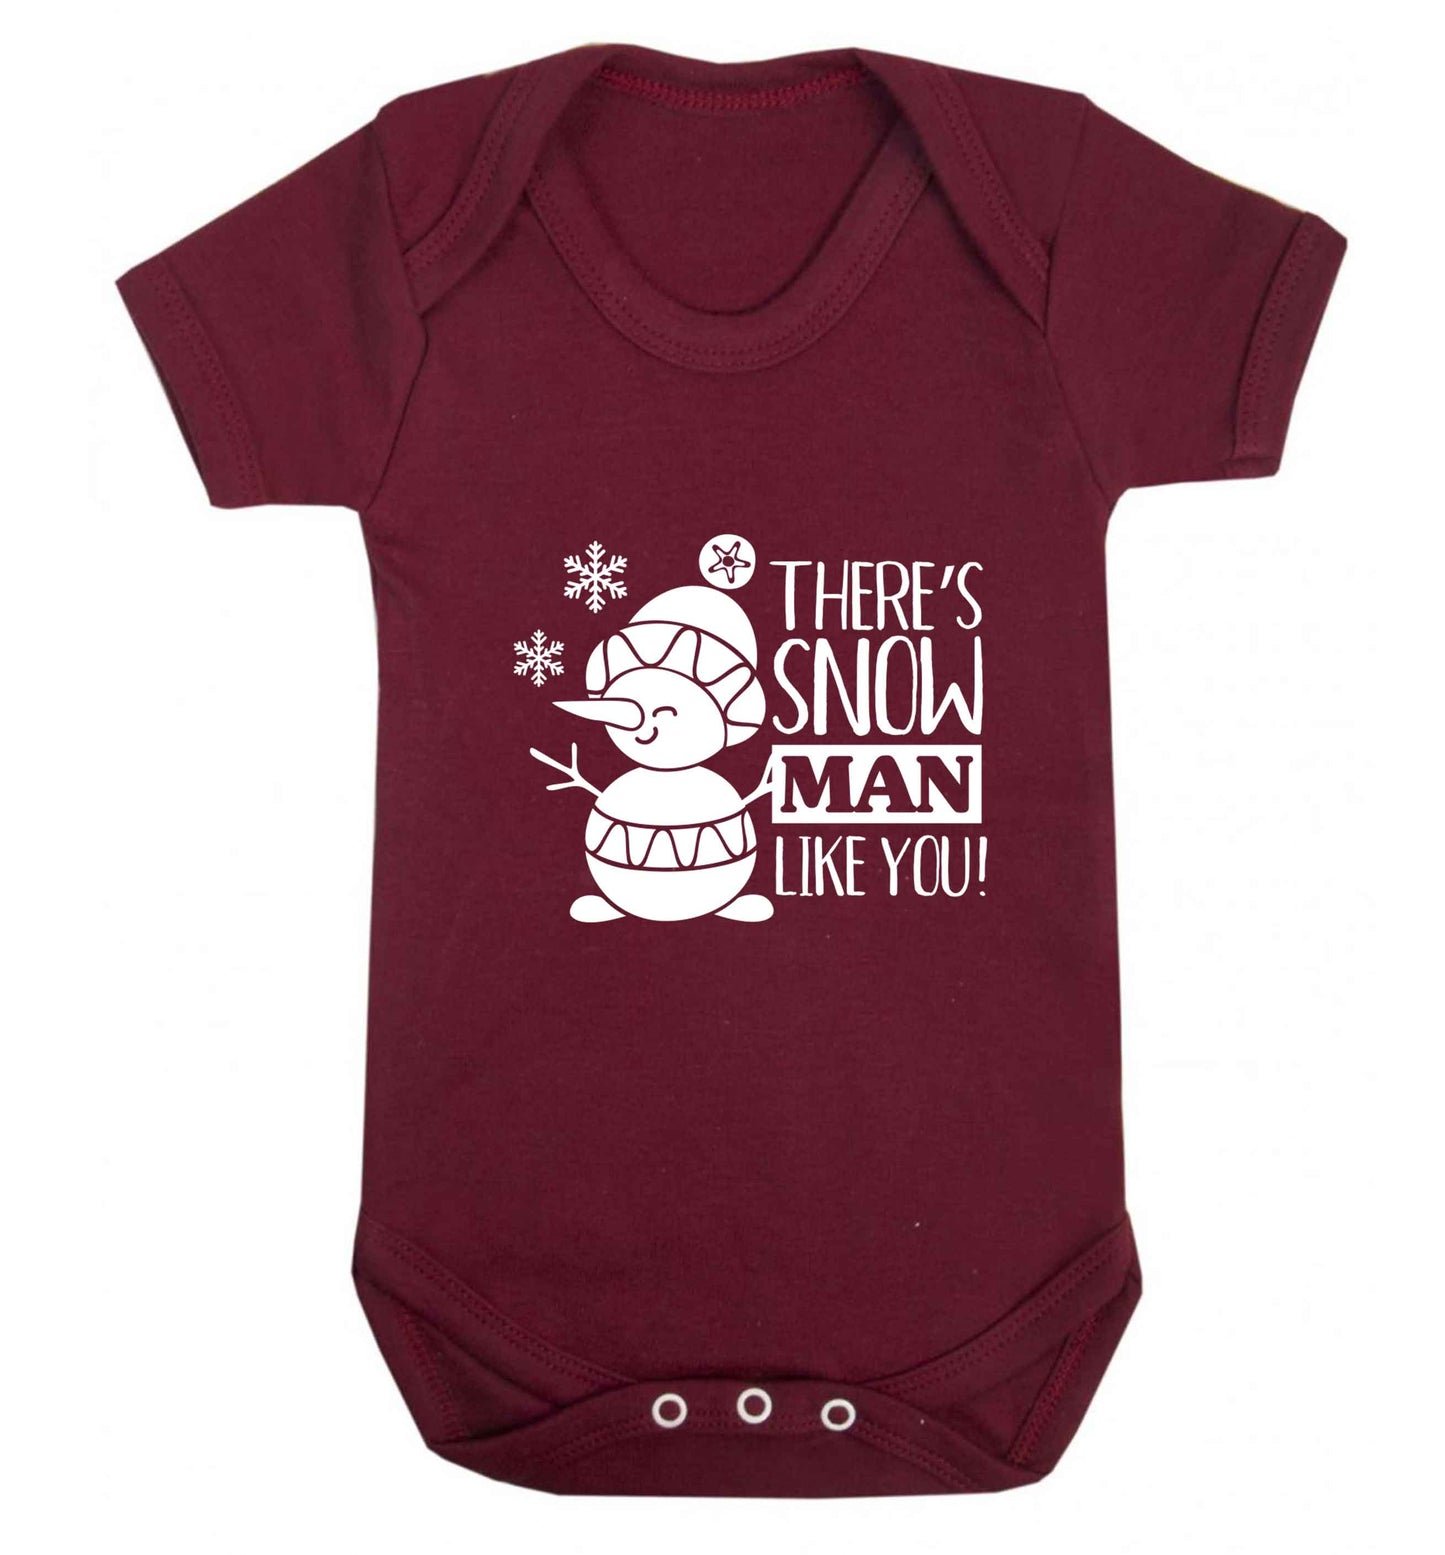 There's snow man like you baby vest maroon 18-24 months